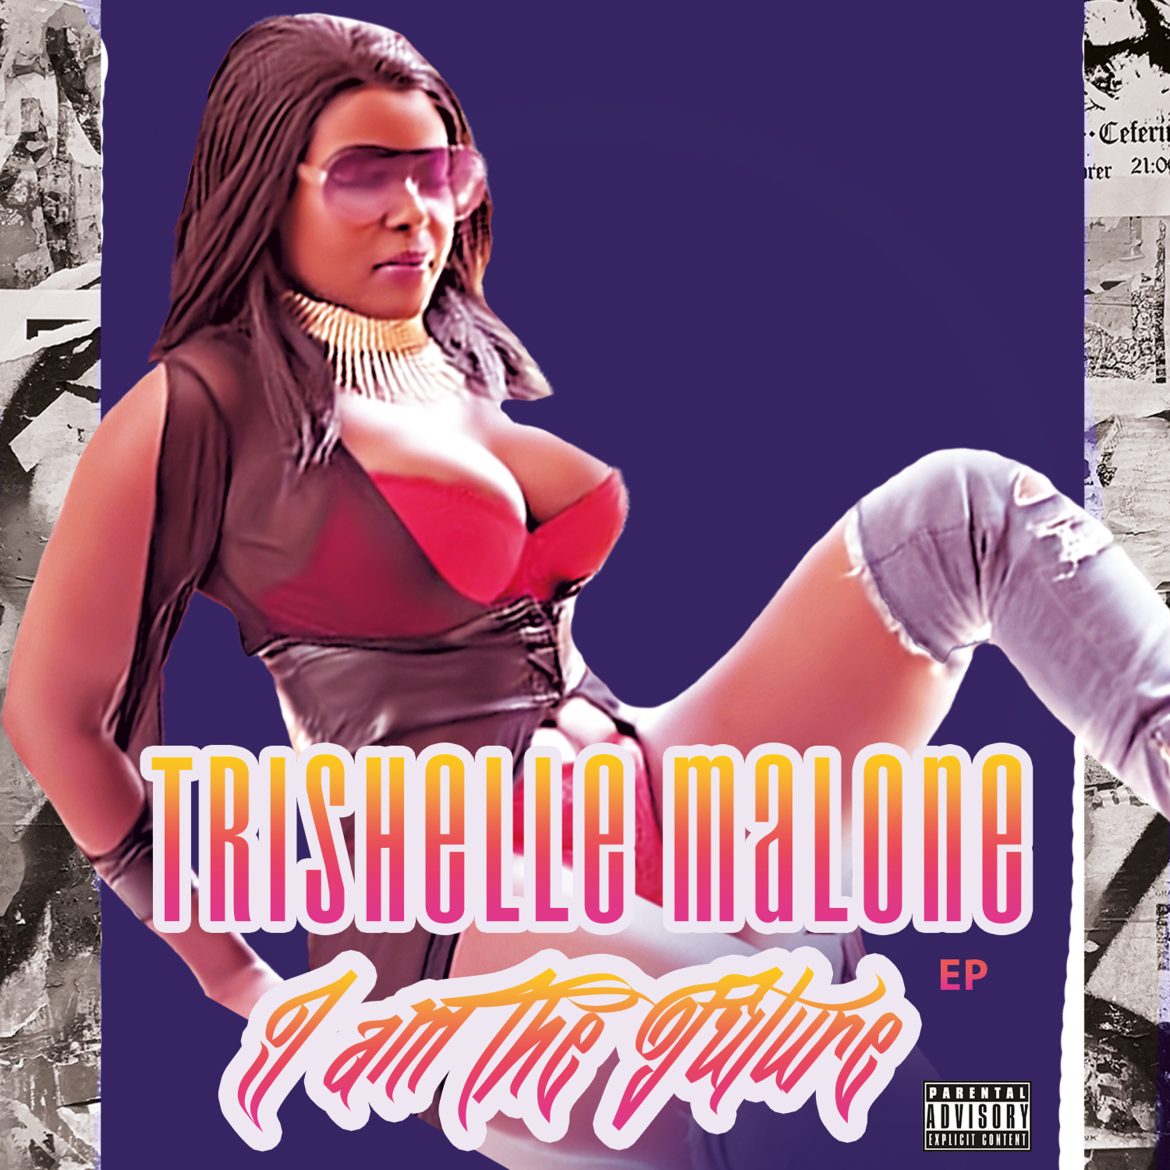 Brand new on The Bafana FM Playlist – Feisty female Hip Hop star Trishelle Malone releases  brand new single LaPorsche Bella off her new EP